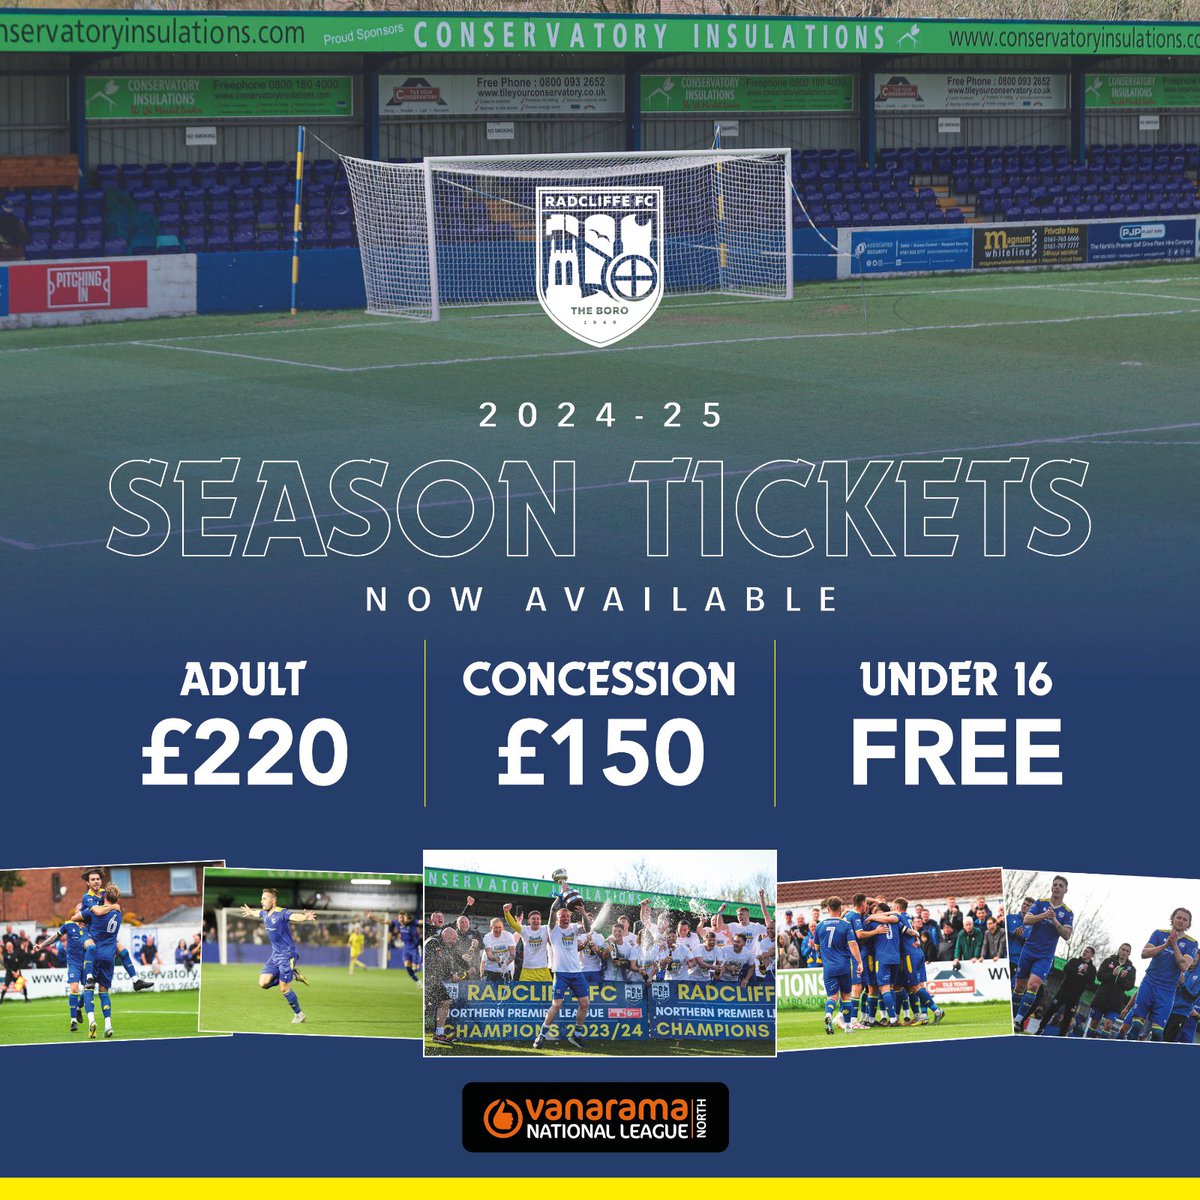 New season. New league. New goals. 💙

Season Tickets for our inaugural 2024/25 National League North campaign are 𝗢𝗡 𝗦𝗔𝗟𝗘 𝗡𝗢𝗪, click the link below to purchase yours! 

🎟️ bit.ly/3UXB0uO

#WeAreRadcliffe #UTB